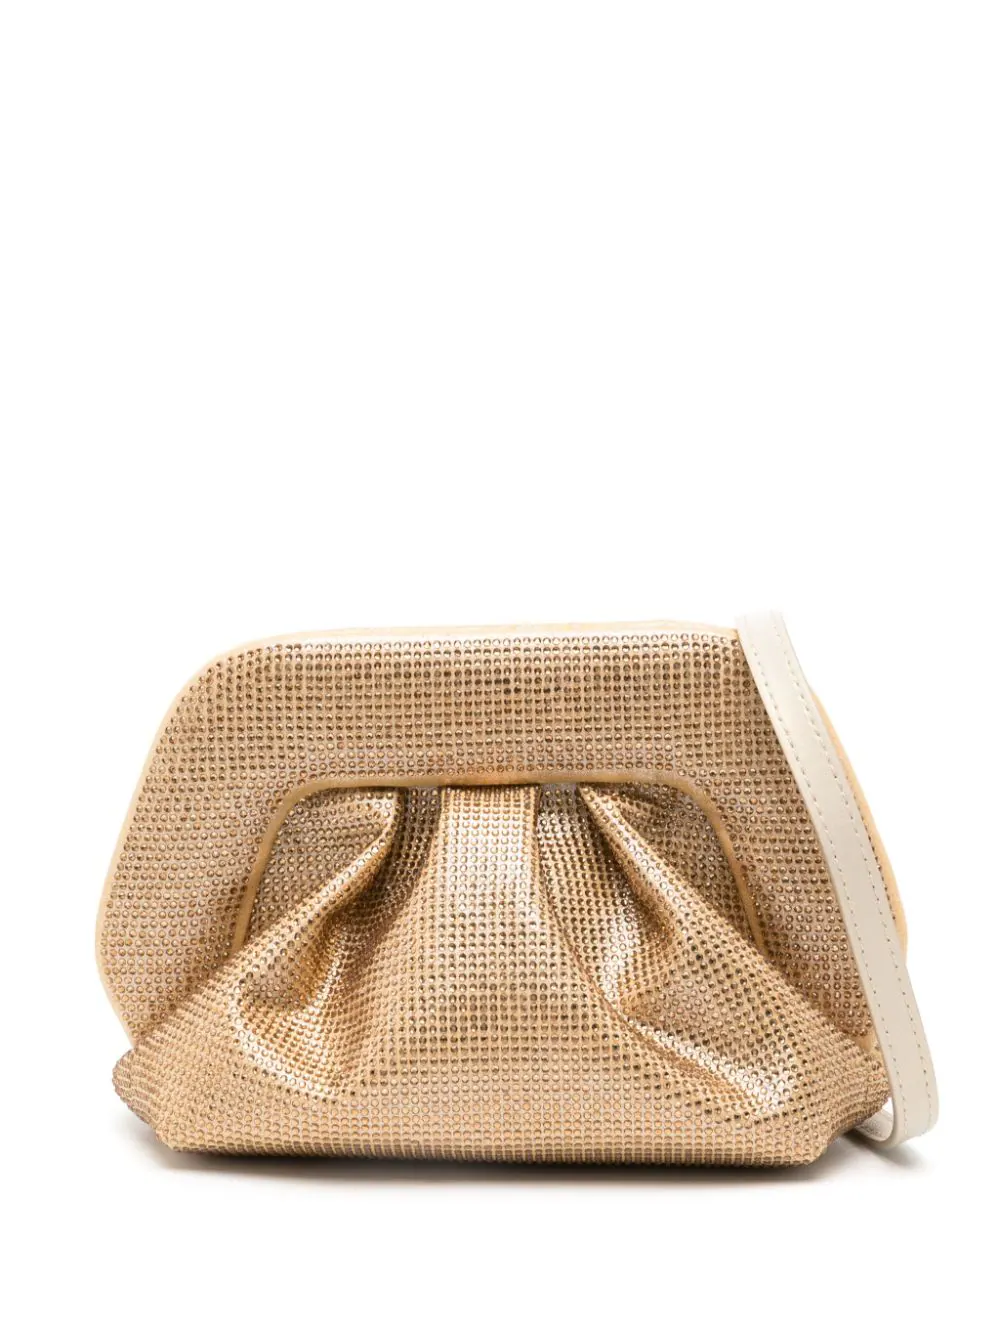 Shop Themoire' Gea Clutch Bag Decorated With Crystals In Metallic